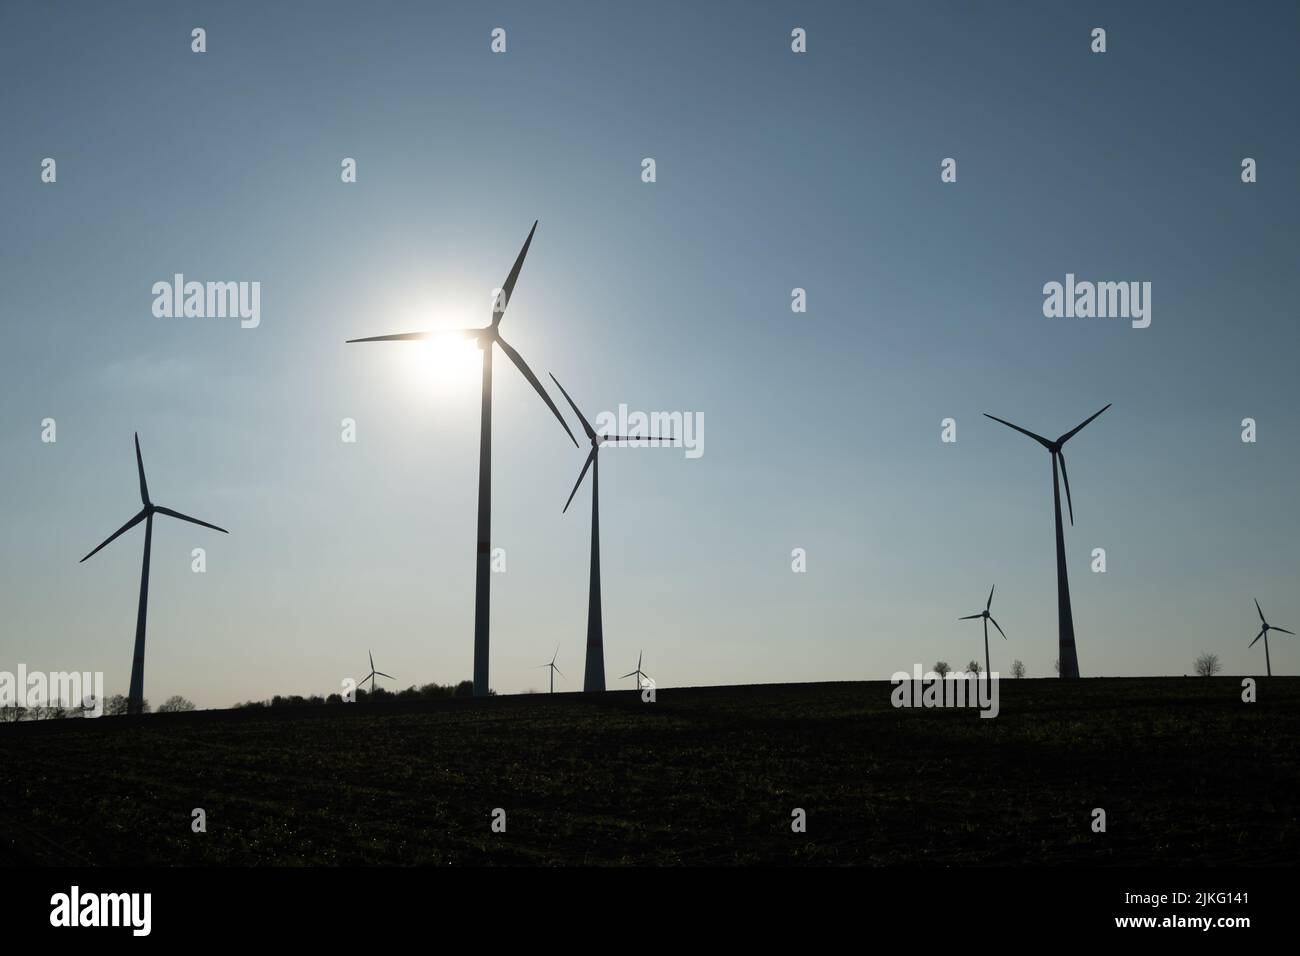 23.04.2022, Germany, Lower Saxony, Barenburg - Wind turbines. 00A220423D627CAROEX.JPG [MODEL RELEASE: NOT APPLICABLE, PROPERTY RELEASE: NO (c) caro im Stock Photo